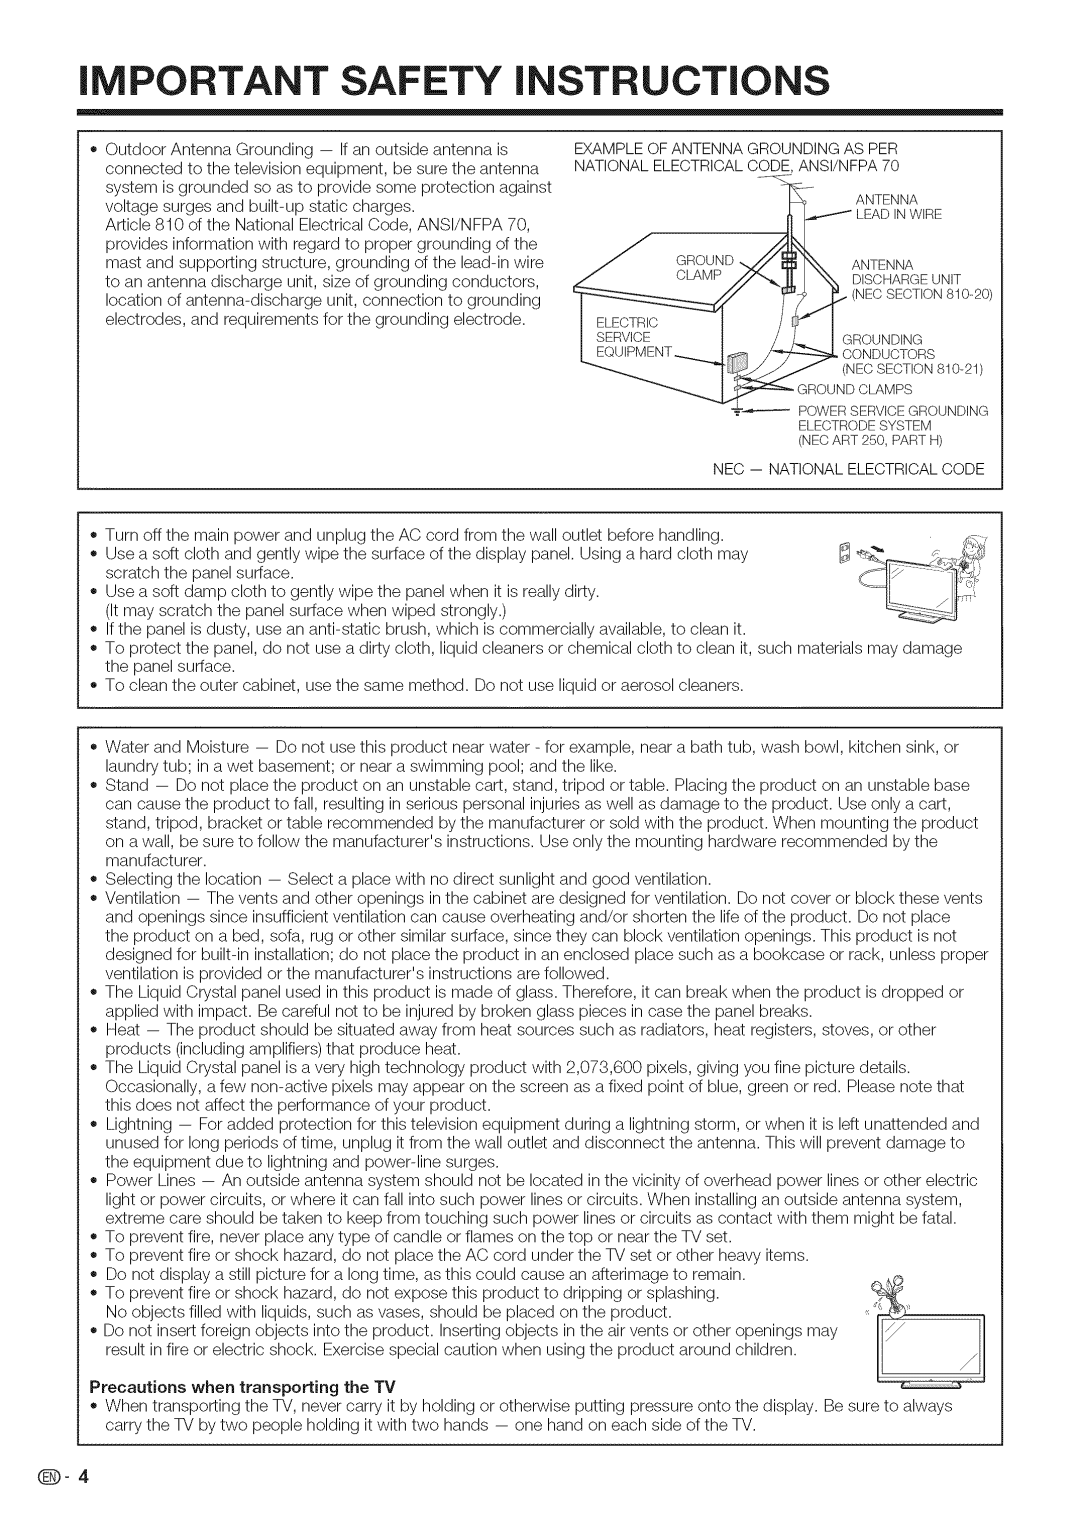 Sharp LC-46LE700, LC-52LE700, LC-40LE700 operation manual iMPORTANT SAFETY iNSTRUCTiONS 